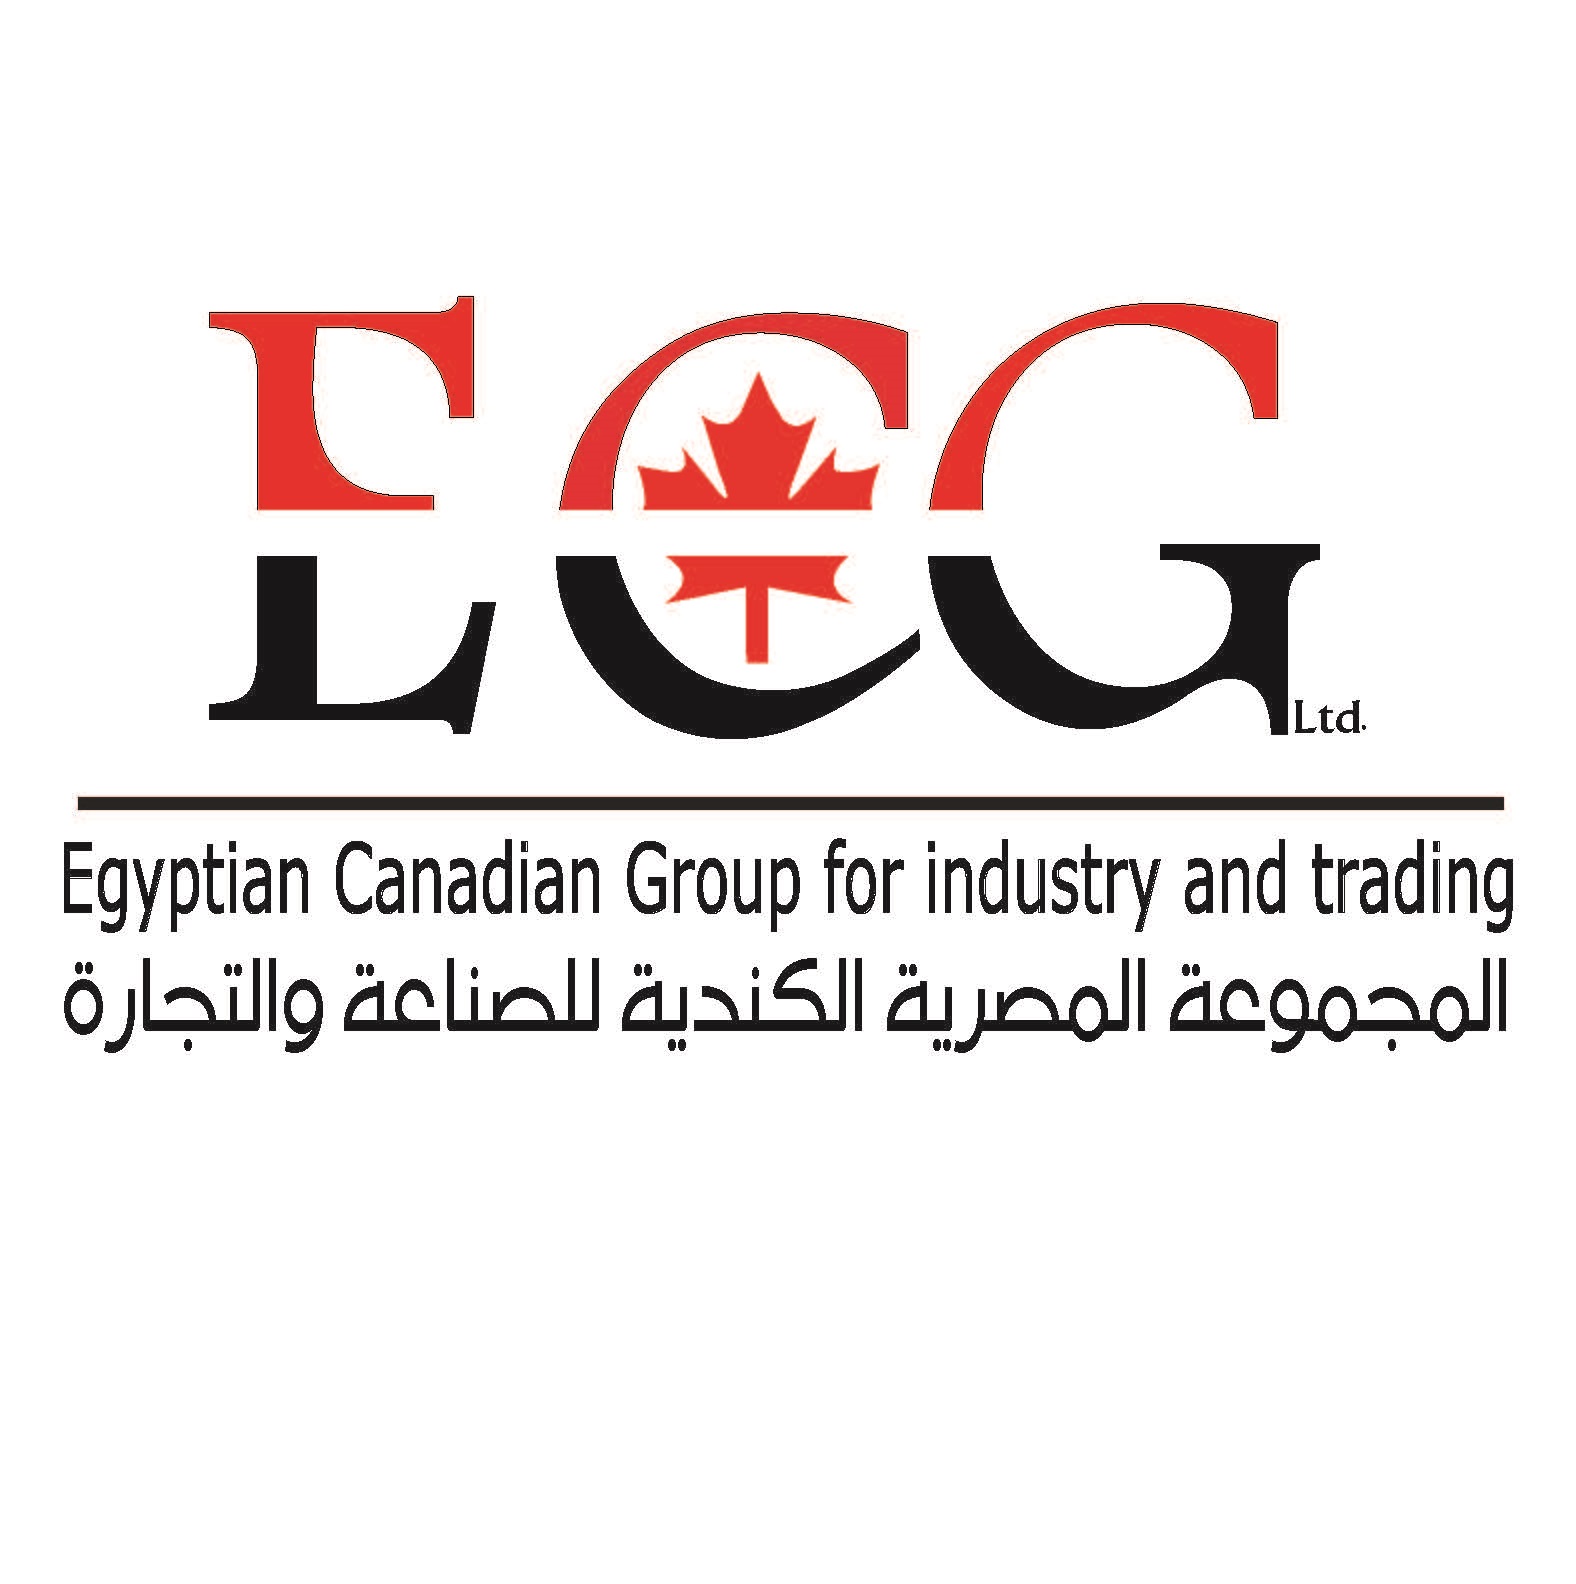 Egyptian Canadian Group